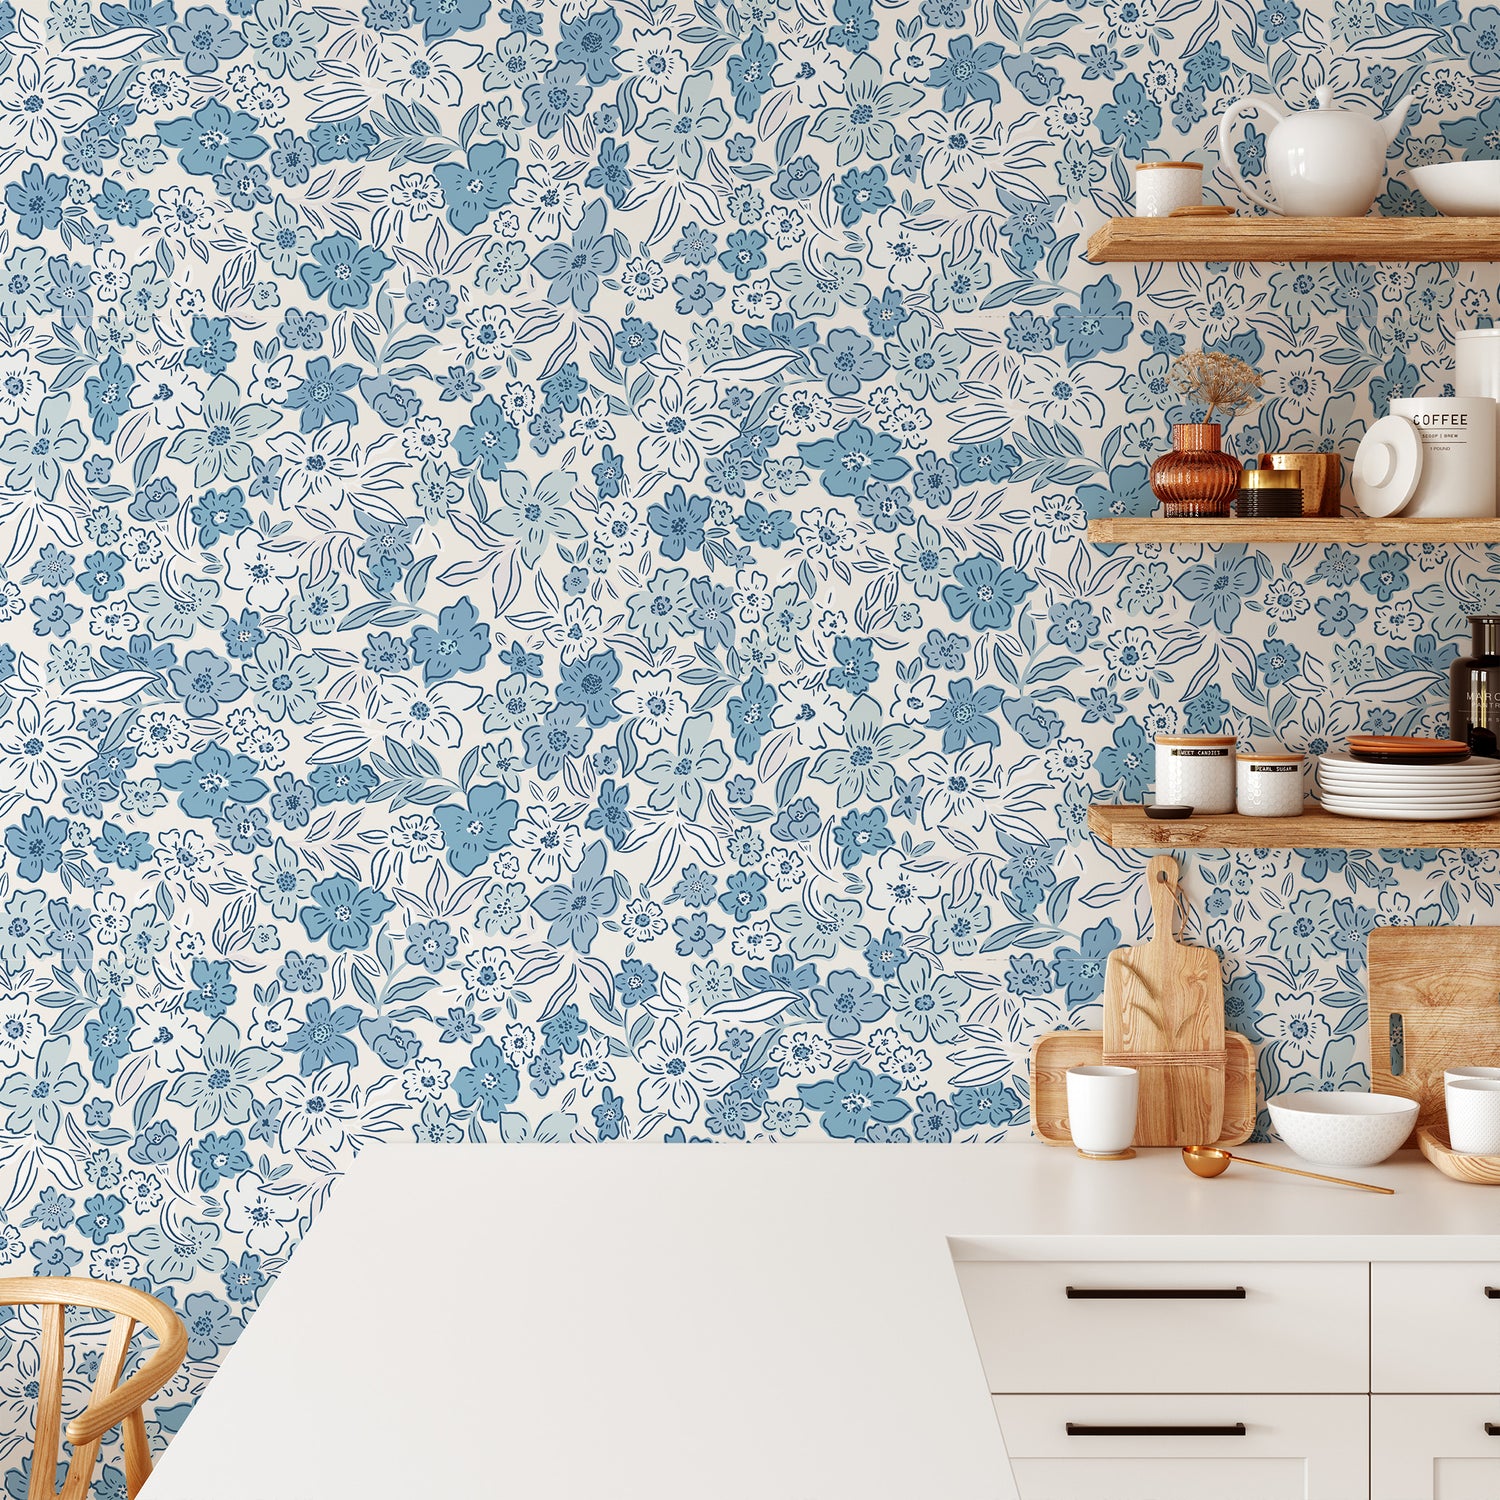 Introducing our Sweet Meadow Wallpaper in Cottage Blue, featuring a charming array of vibrant botanicals and scattered flowers in a calming blue hue shown in a full size image.